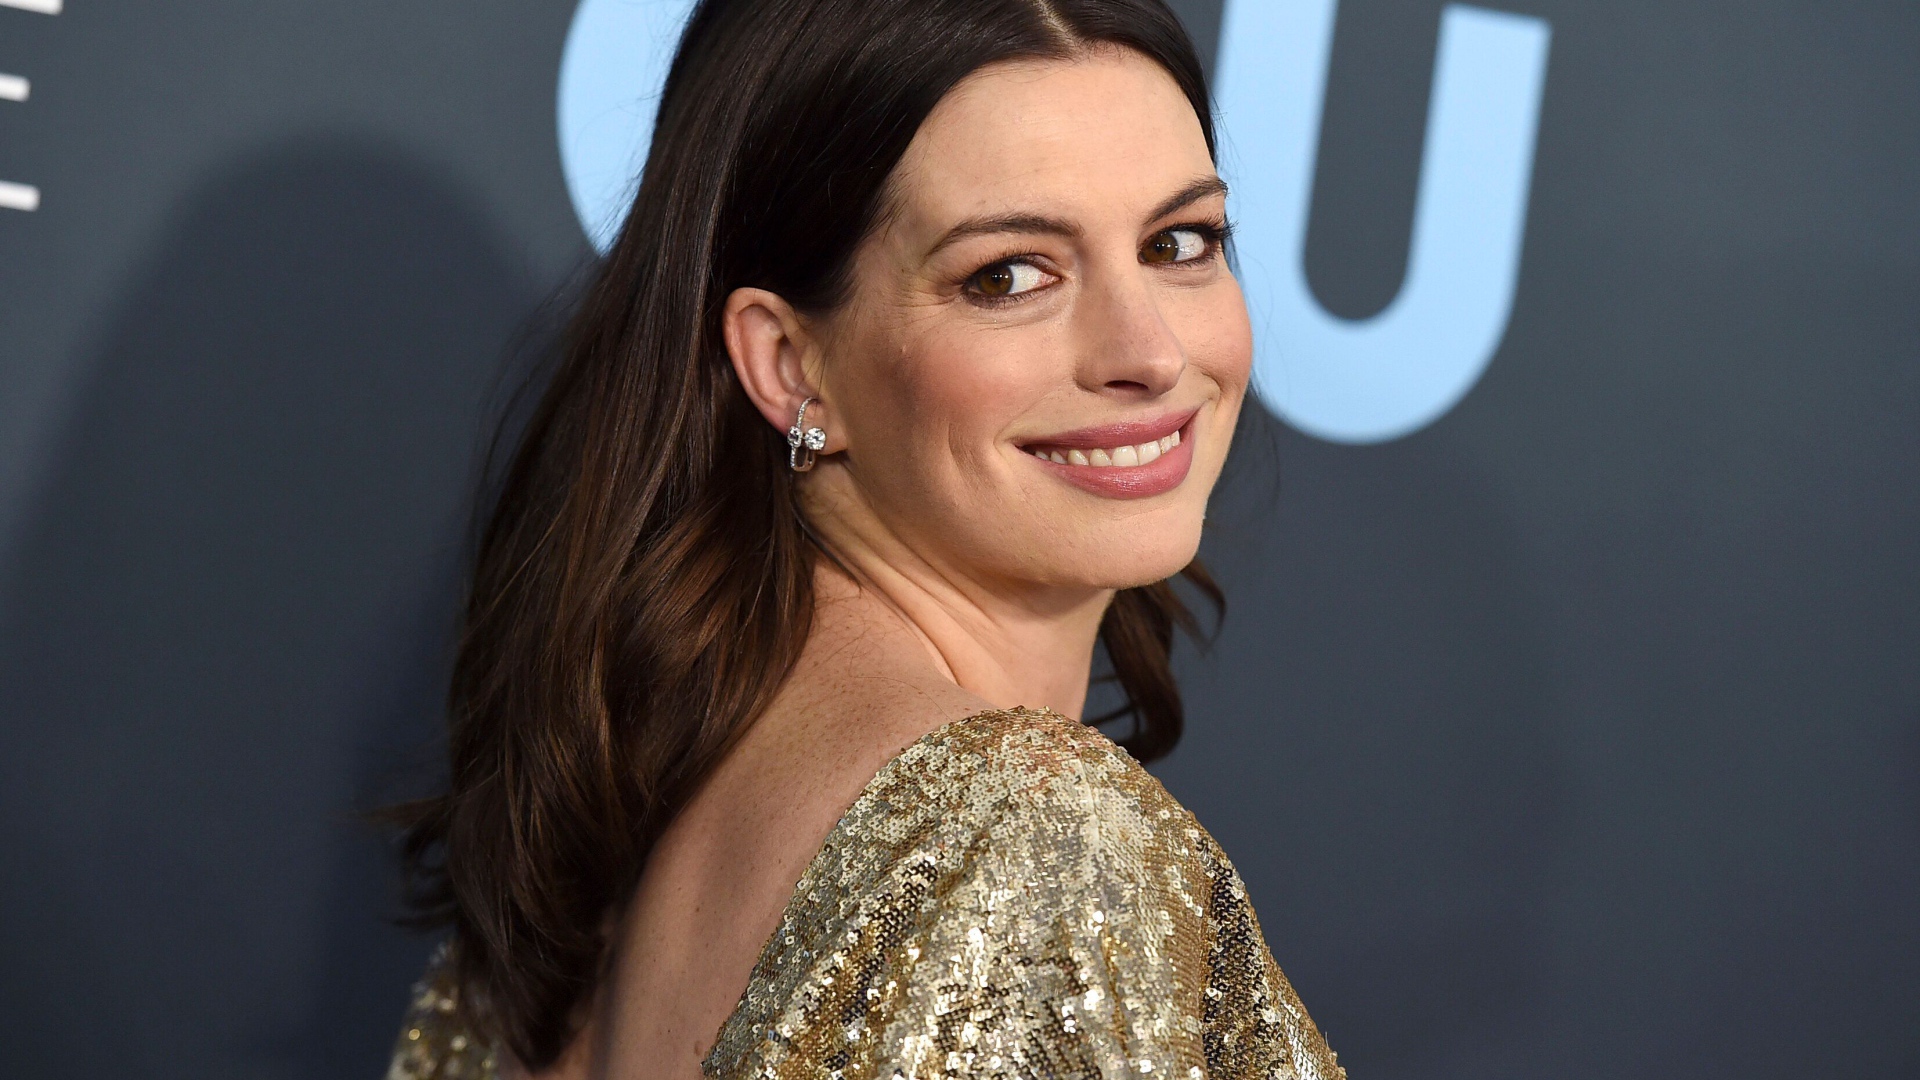 Smiling actress Anne Hathaway in a bright dress